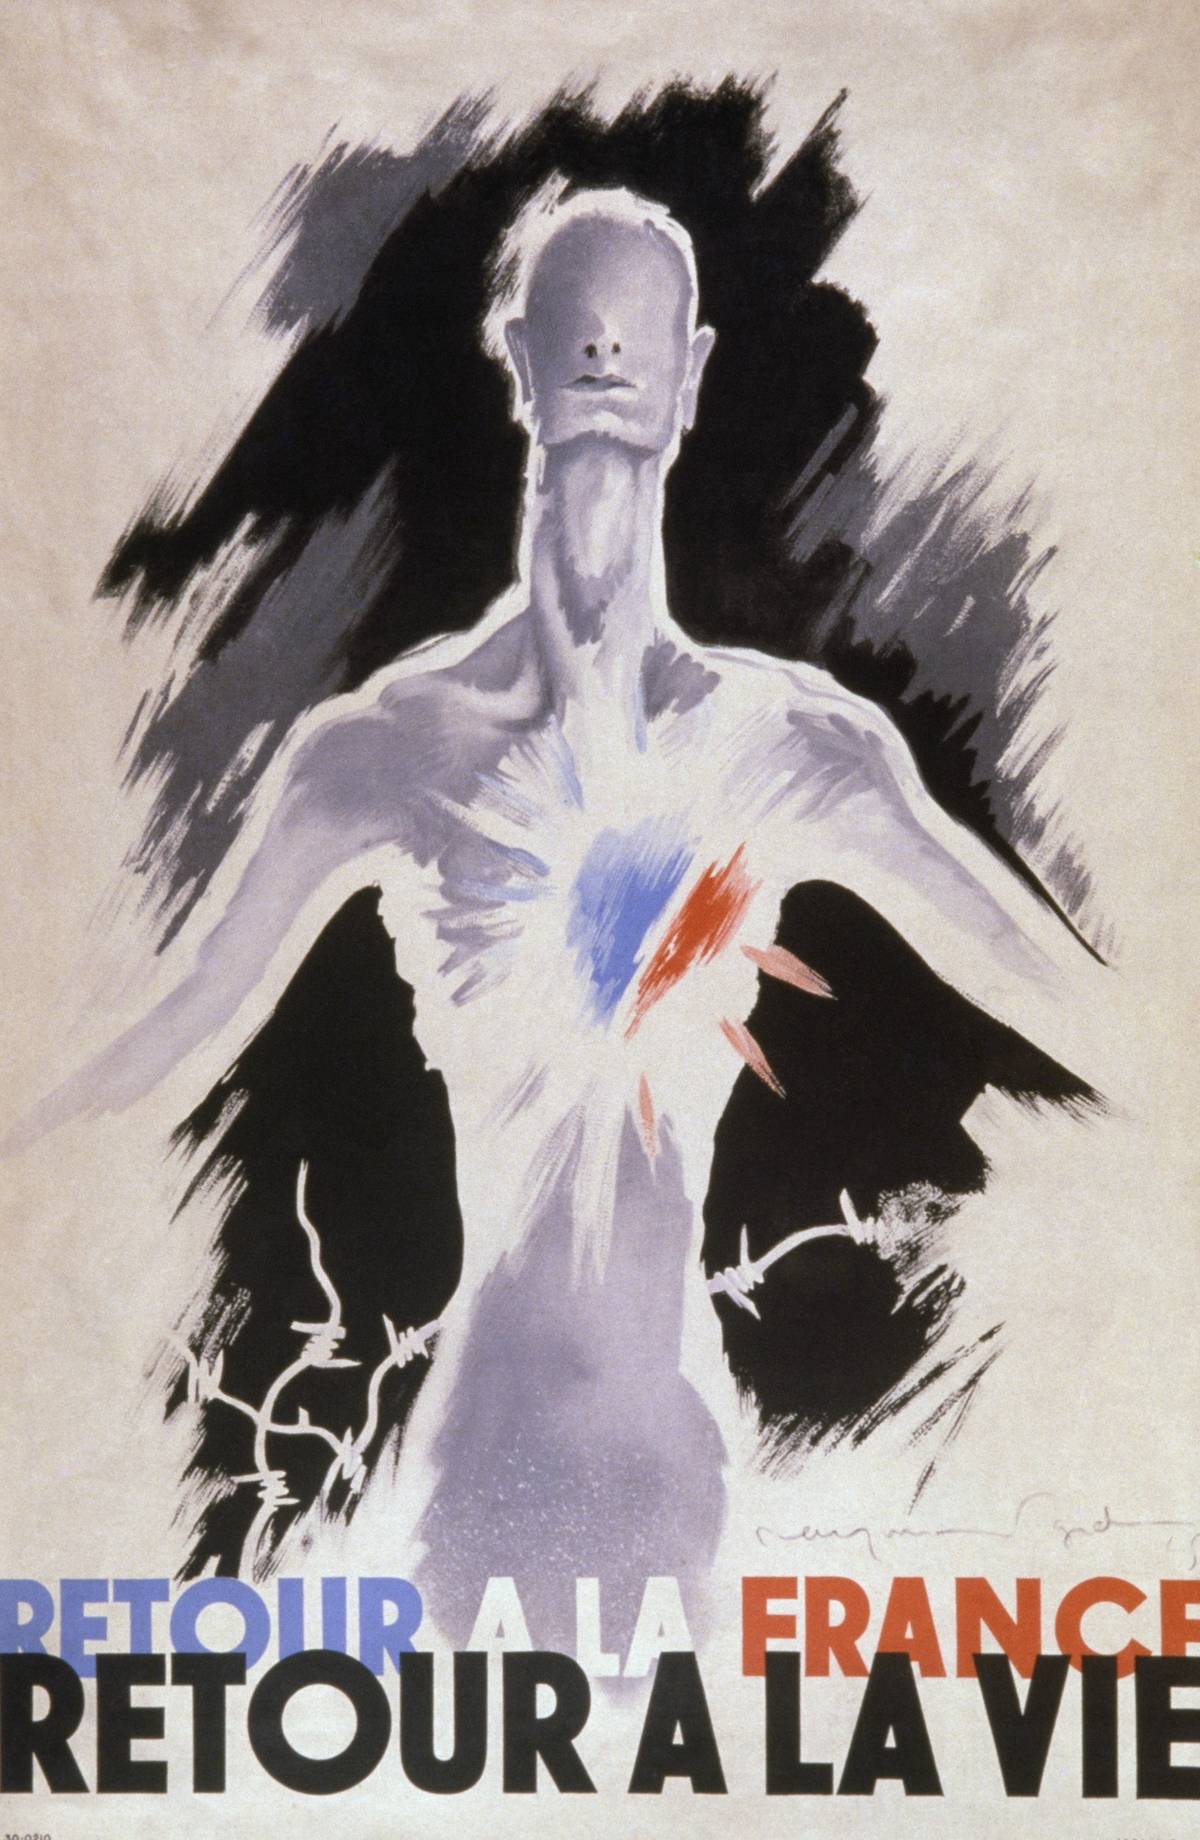 Raymond Gid’s poster, ‘Return to France, Return to Life,’ for the return of deportees from the concentration camps, in 1945